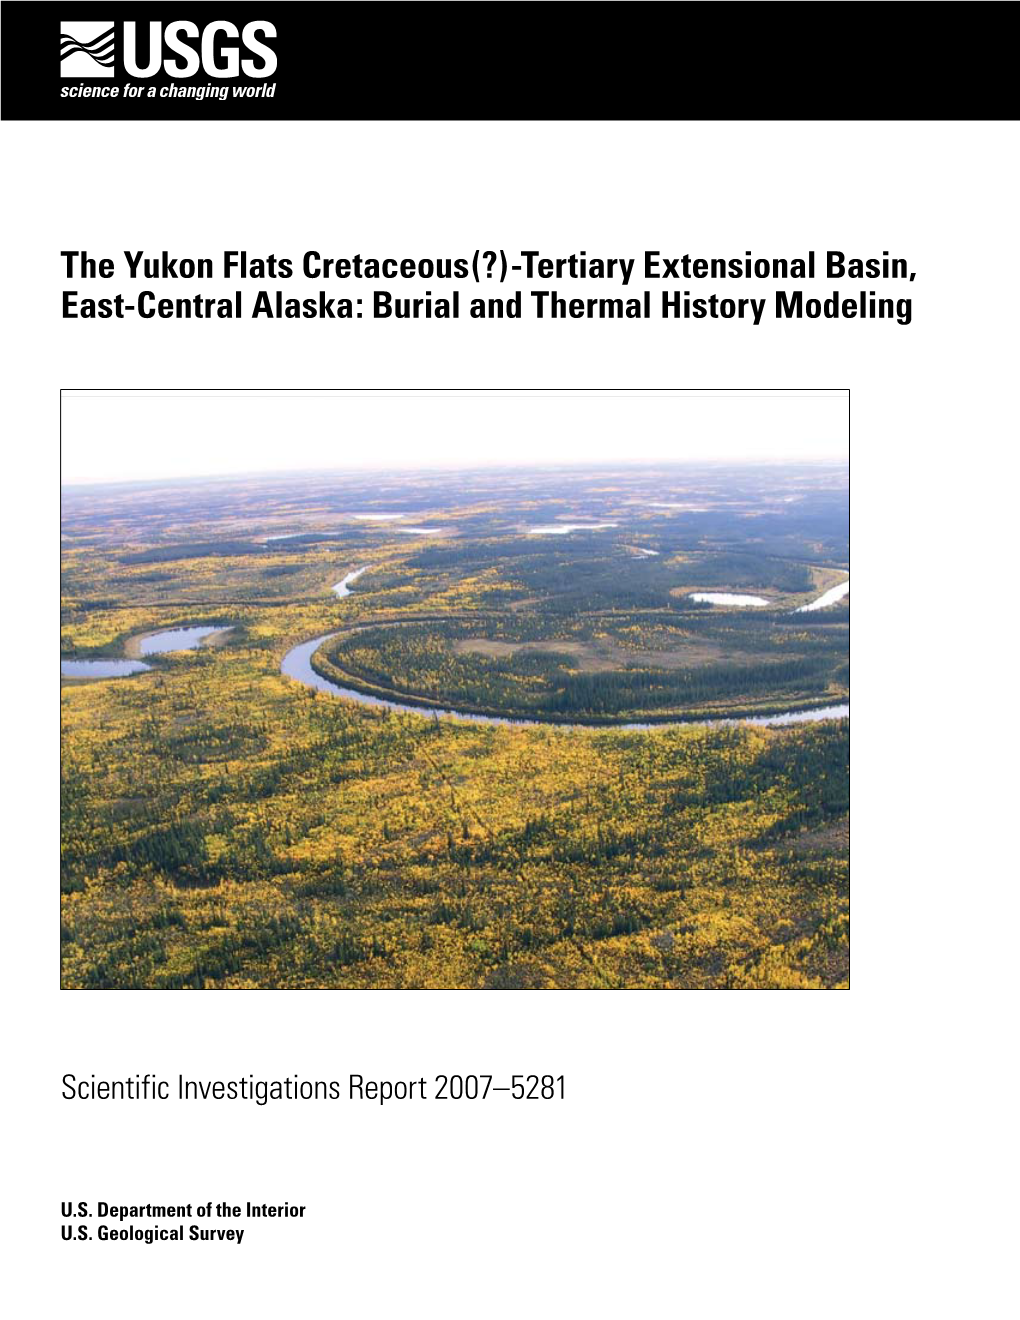 Tertiary Extensional Basin, East-Central Alaska: Burial and Thermal History Modeling